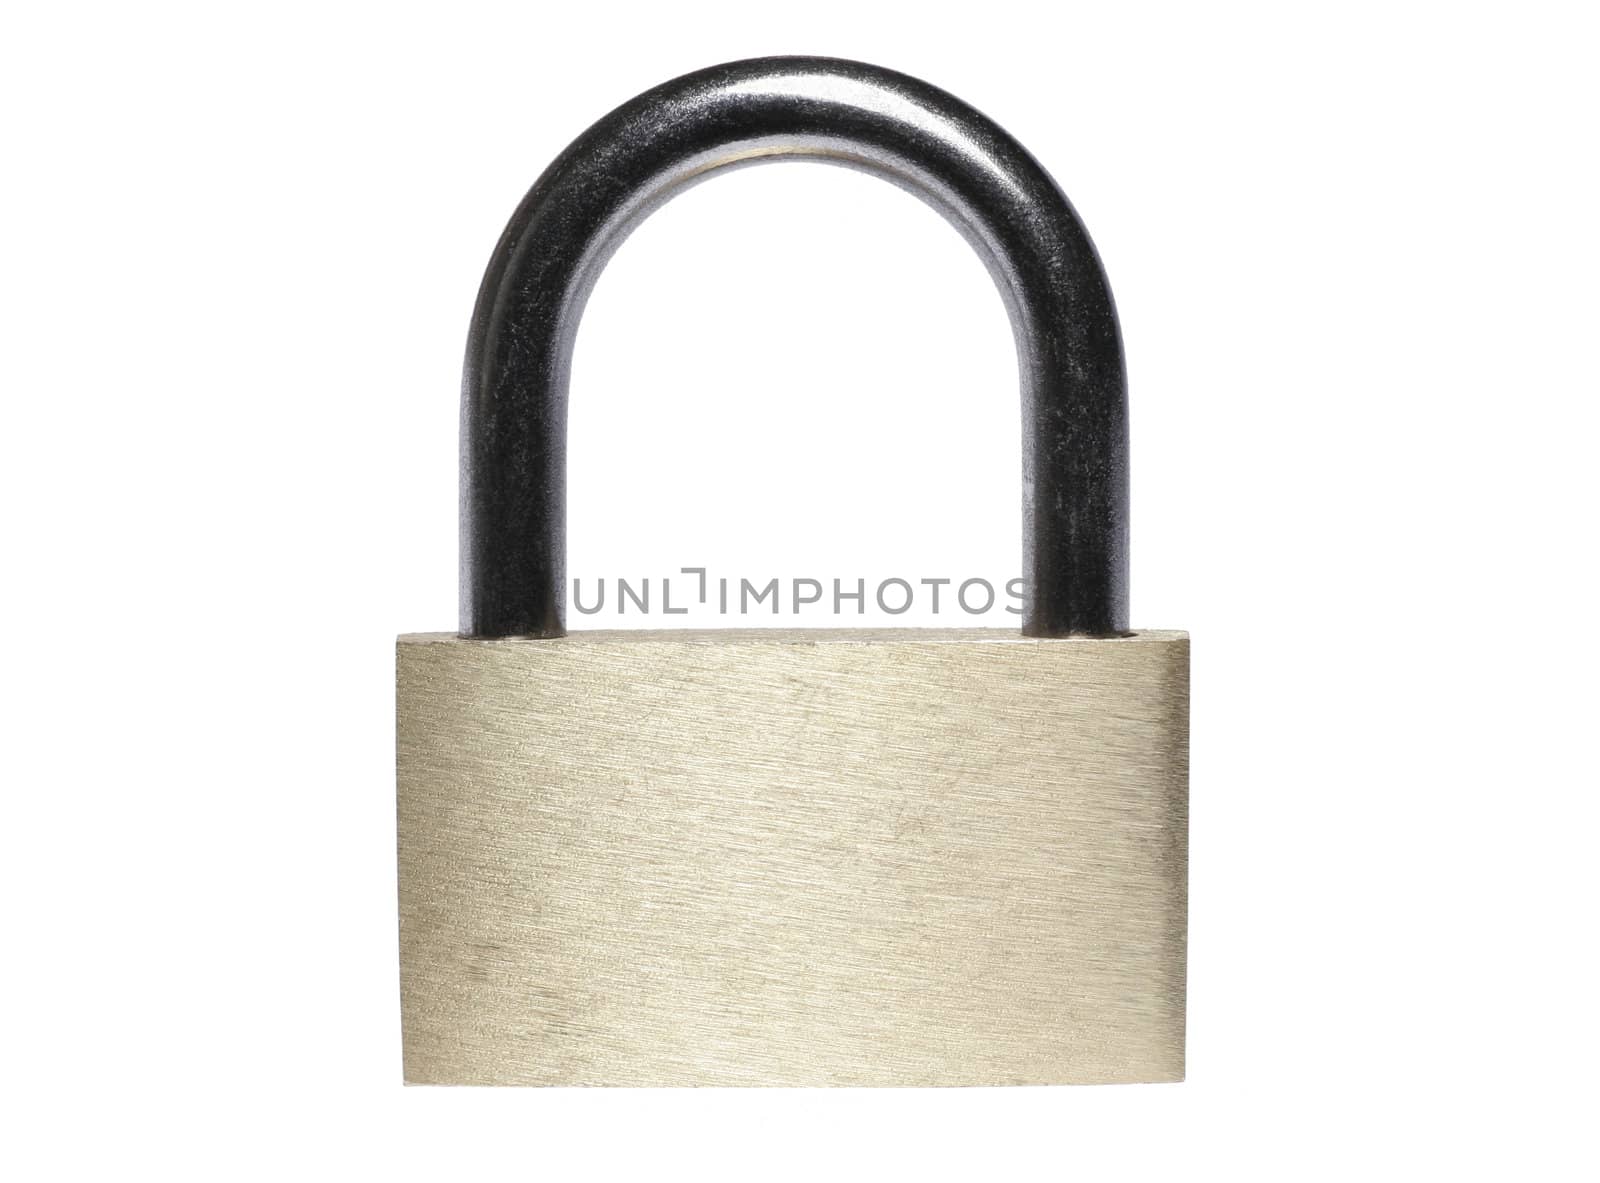 Closed Brass Metal Padlock On A White Background